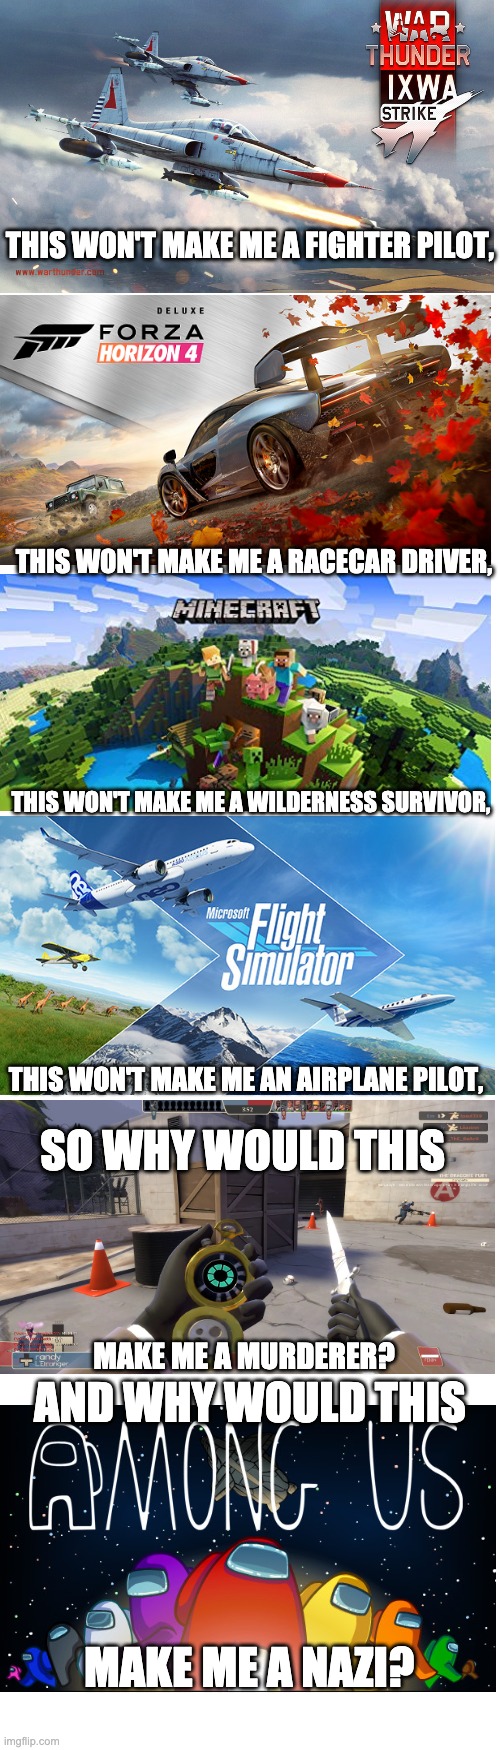 checkmate anti gamers | THIS WON'T MAKE ME A FIGHTER PILOT, THIS WON'T MAKE ME A RACECAR DRIVER, THIS WON'T MAKE ME A WILDERNESS SURVIVOR, THIS WON'T MAKE ME AN AIRPLANE PILOT, SO WHY WOULD THIS; MAKE ME A MURDERER? AND WHY WOULD THIS; MAKE ME A NAZI? | image tagged in long blank white template | made w/ Imgflip meme maker